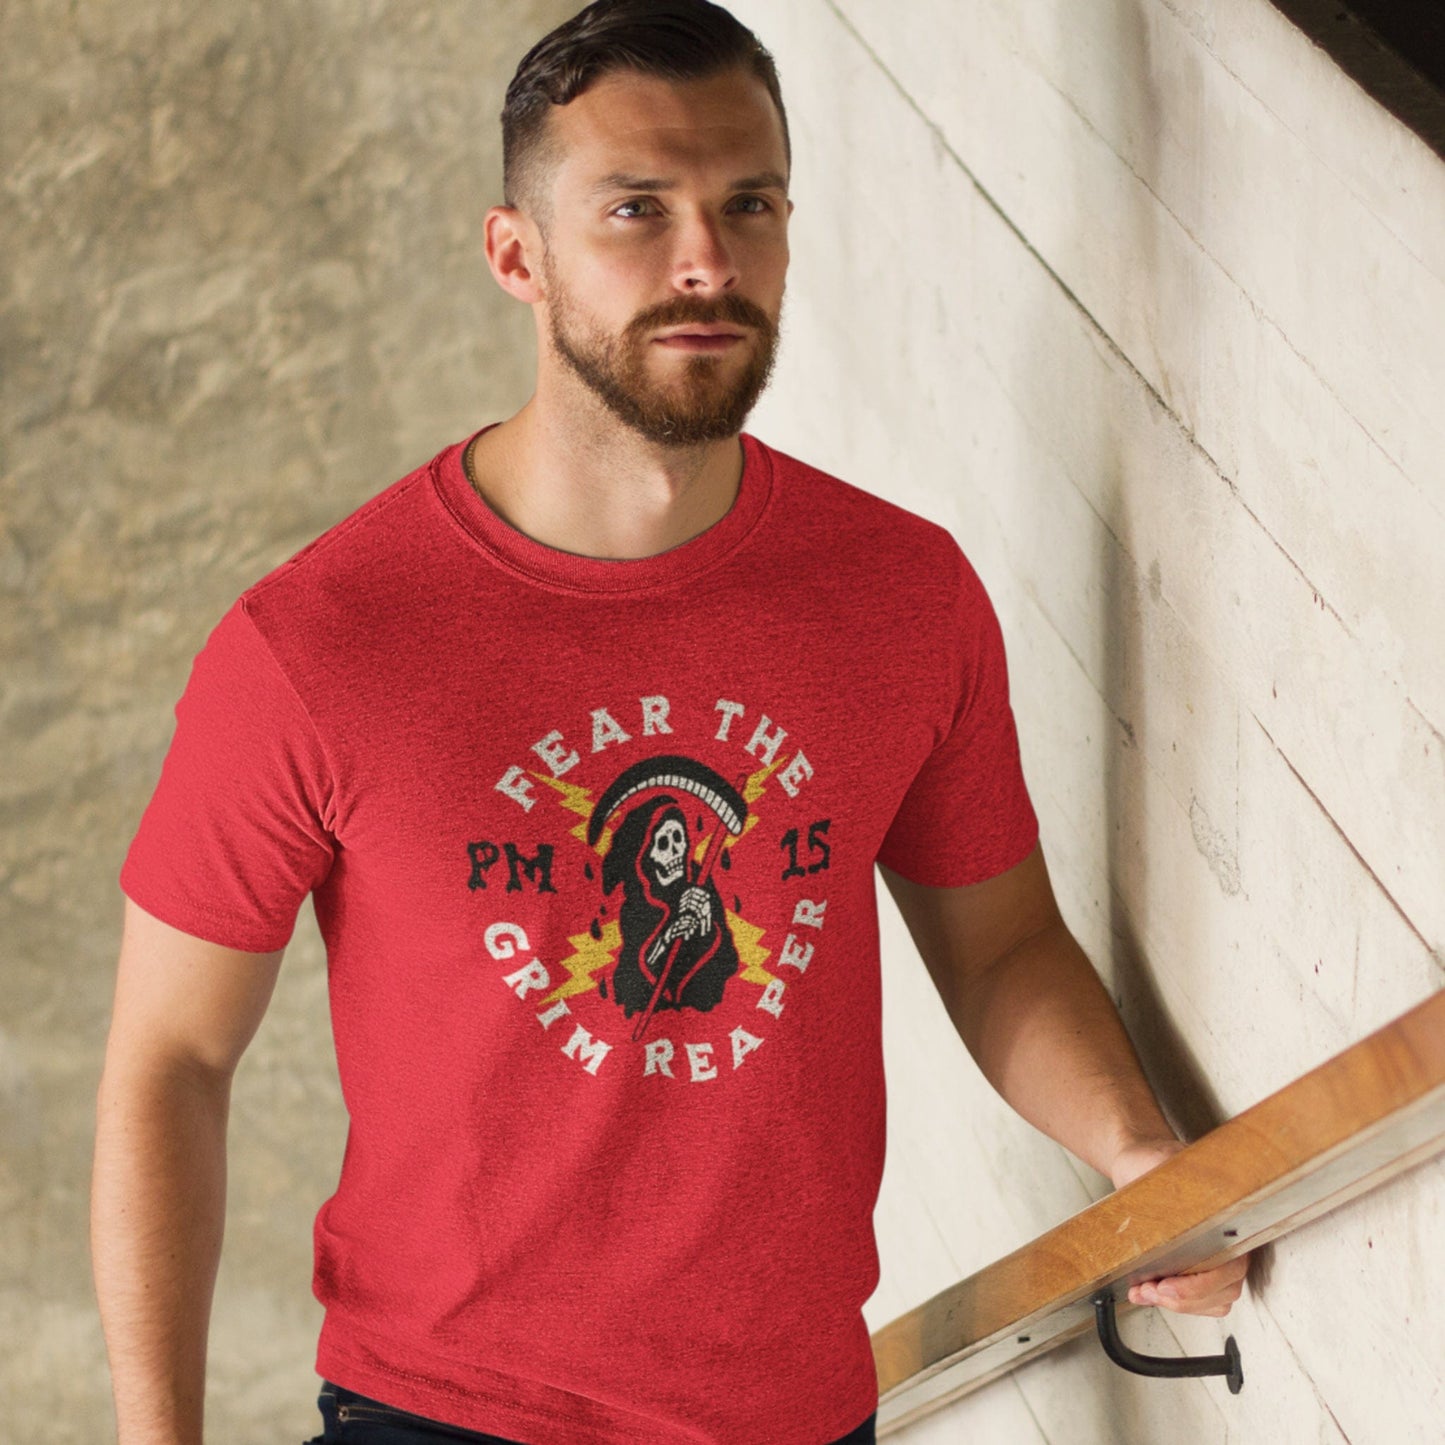 KC Swag Kansas City Chiefs GRIM REAPER PM15 on heather red t-shirt worn by male model in urban stairwell